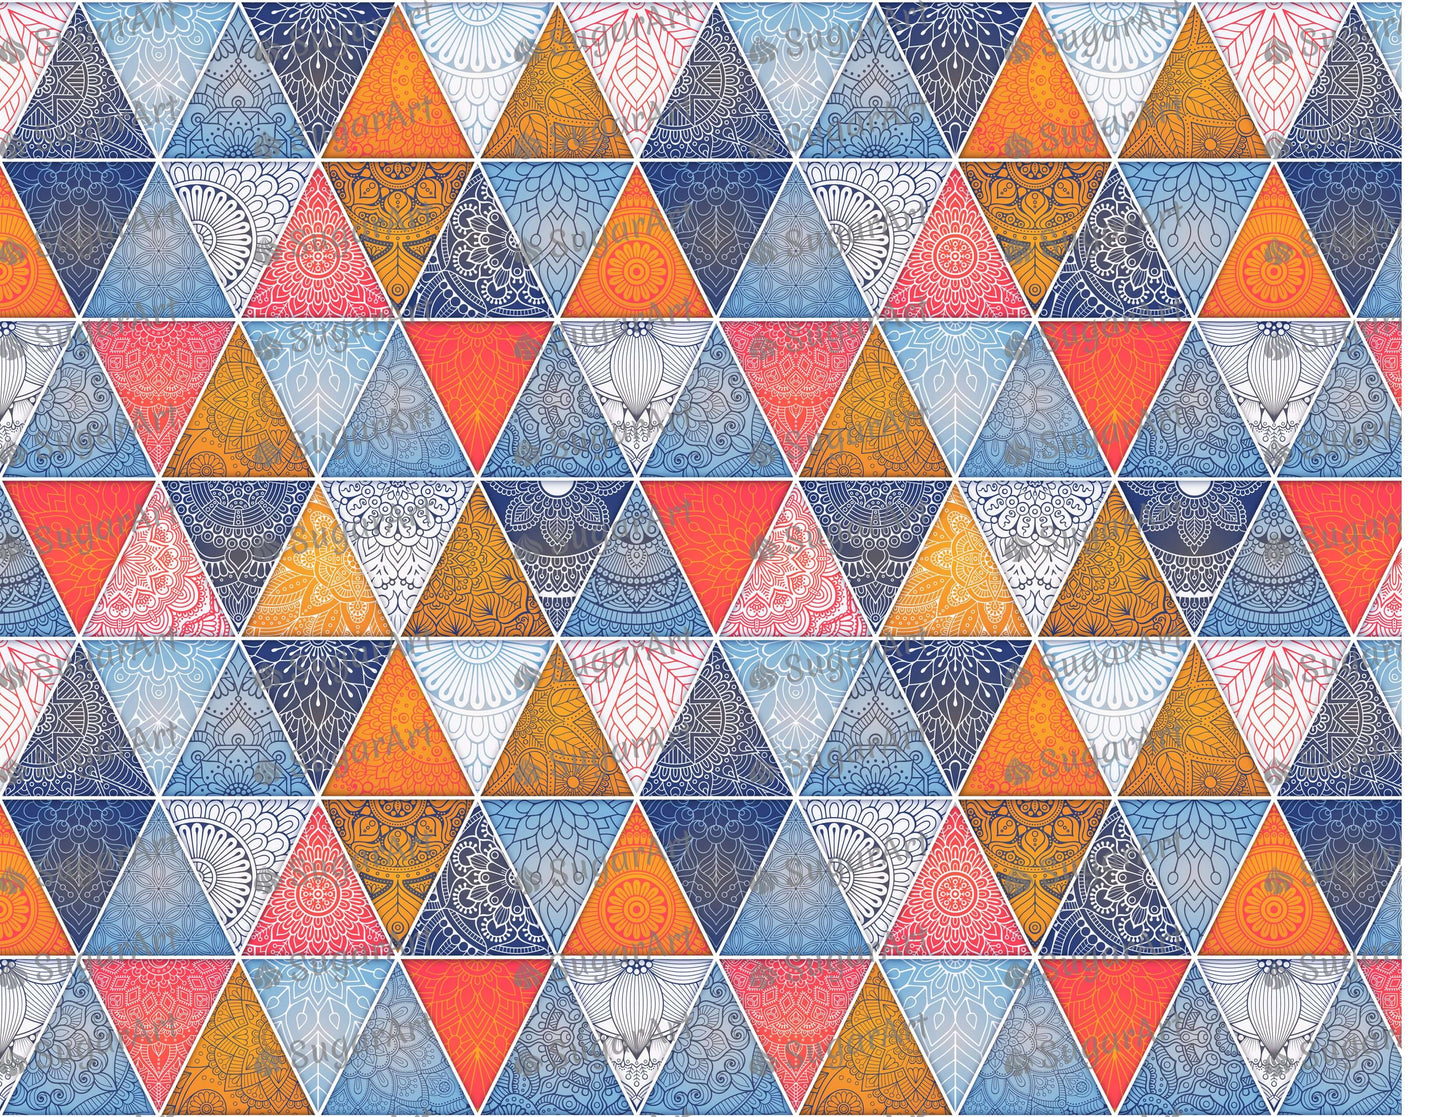 Geometric Abstract Background with Mandalas - Icing - ISA247.